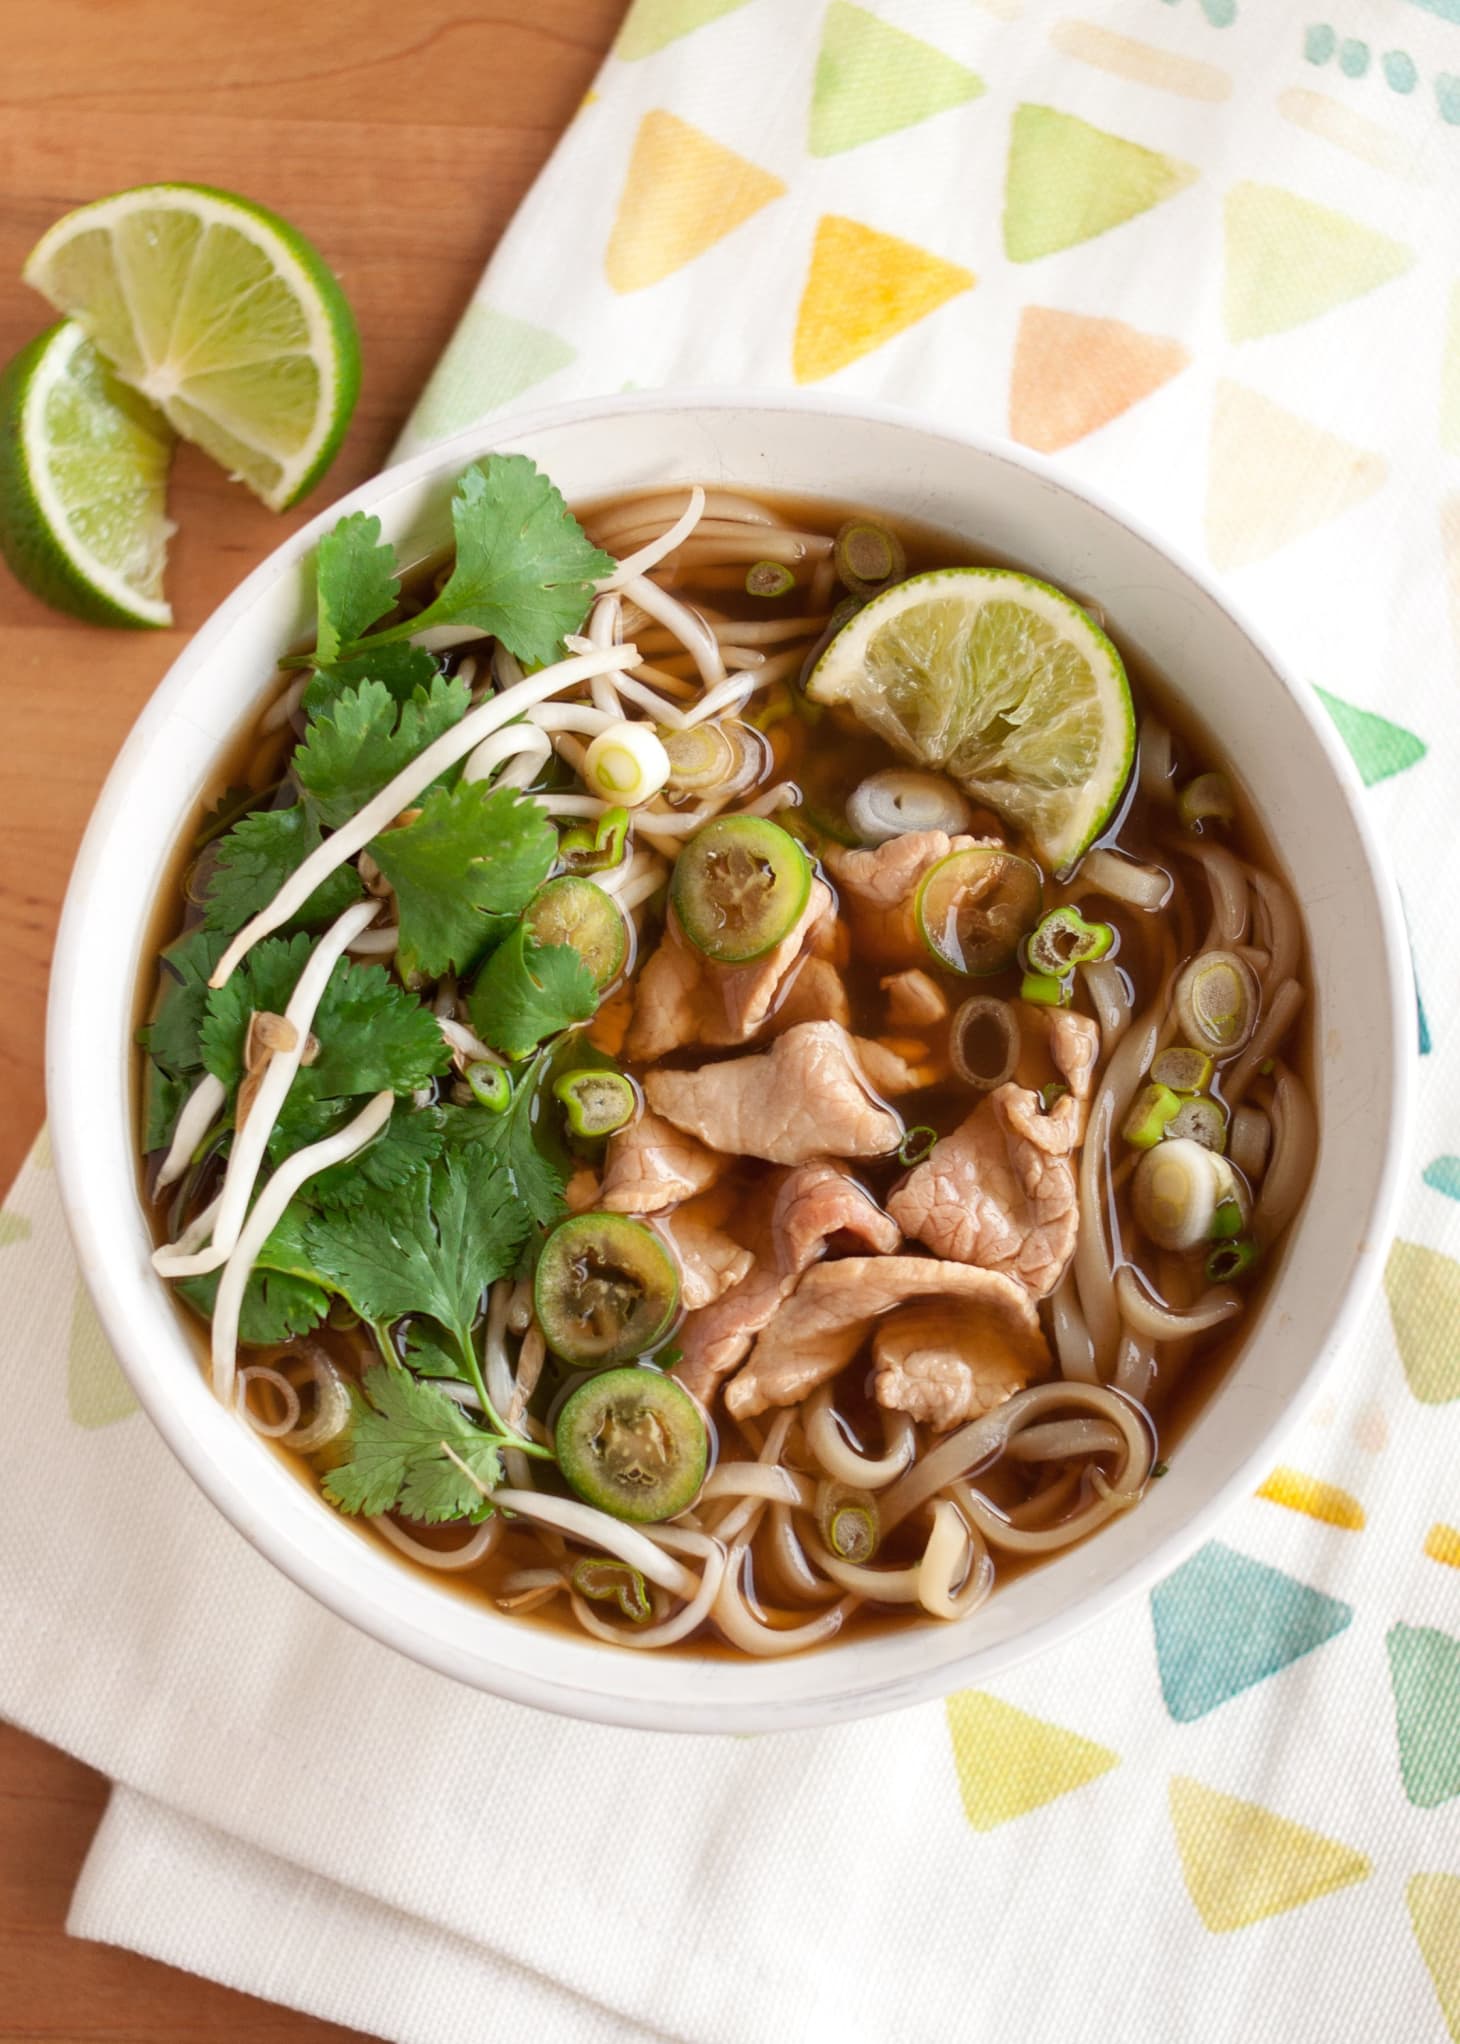 Pho Recipe - How To Make Vietnamese Beef Noodle Pho | Kitchn